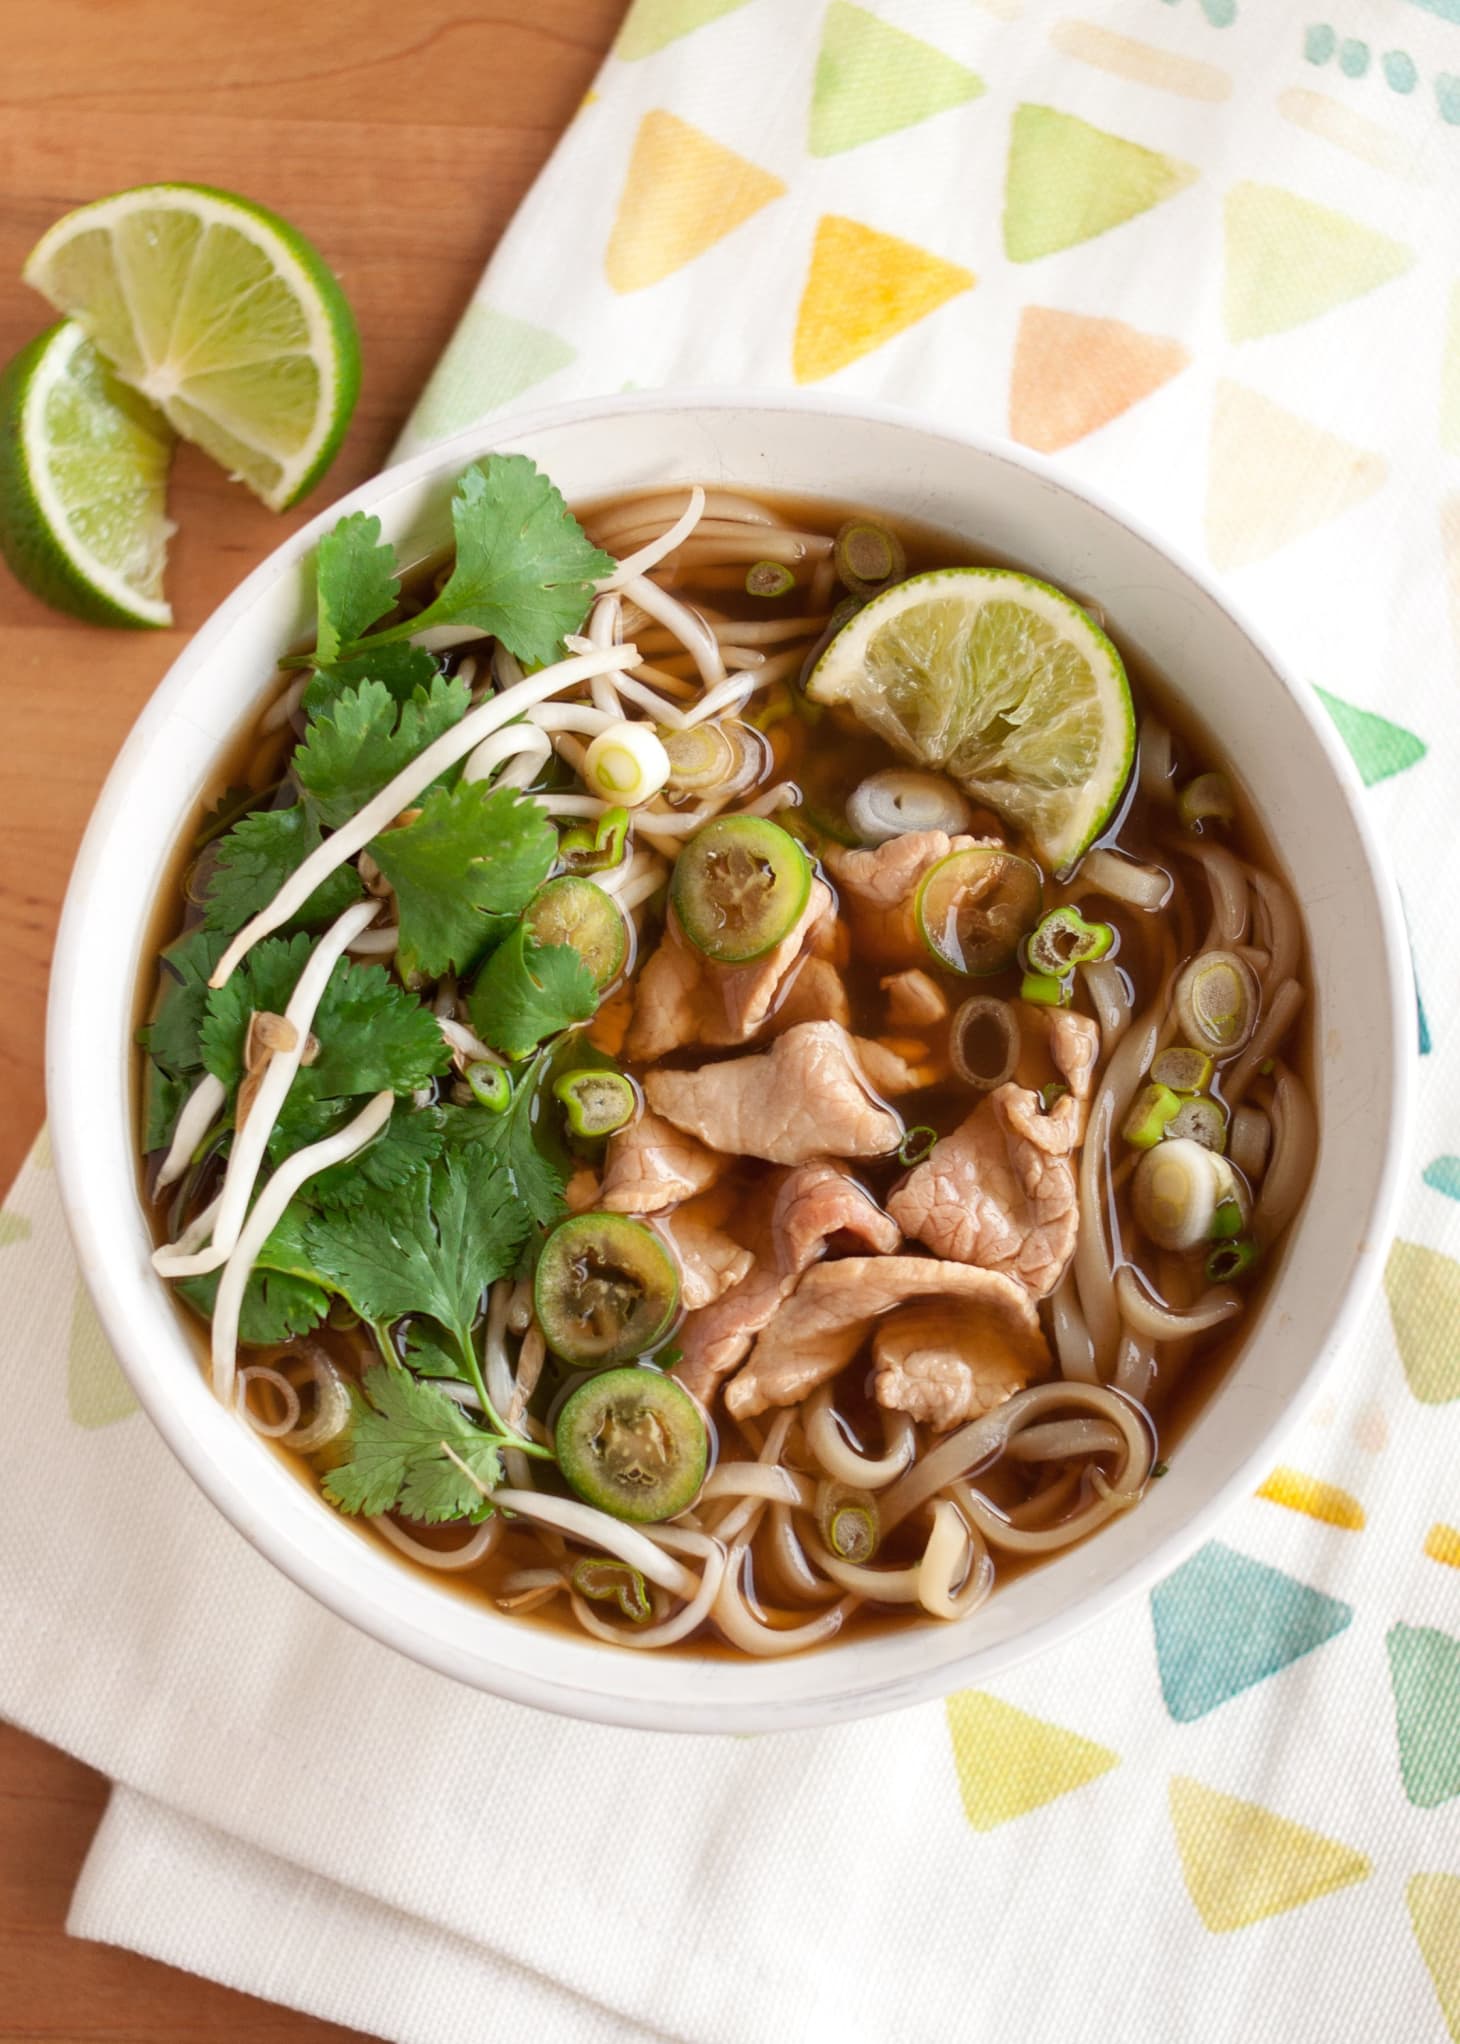 Pho Recipe - How To Make Vietnamese Beef Noodle Pho | Kitchn